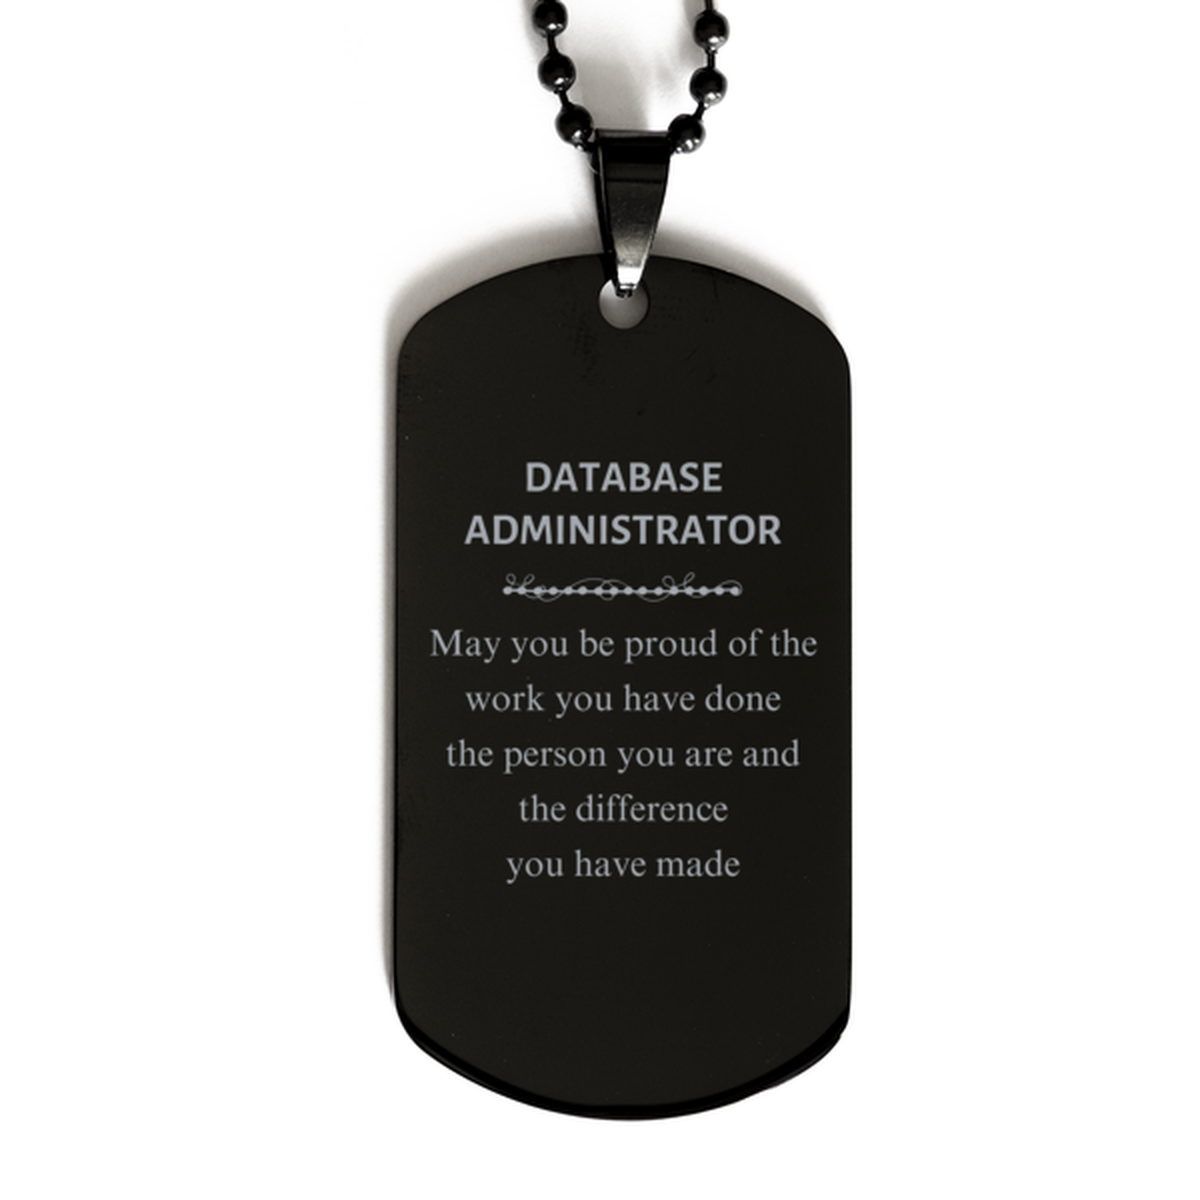 Database Administrator May you be proud of the work you have done, Retirement Database Administrator Black Dog Tag for Colleague Appreciation Gifts Amazing for Database Administrator